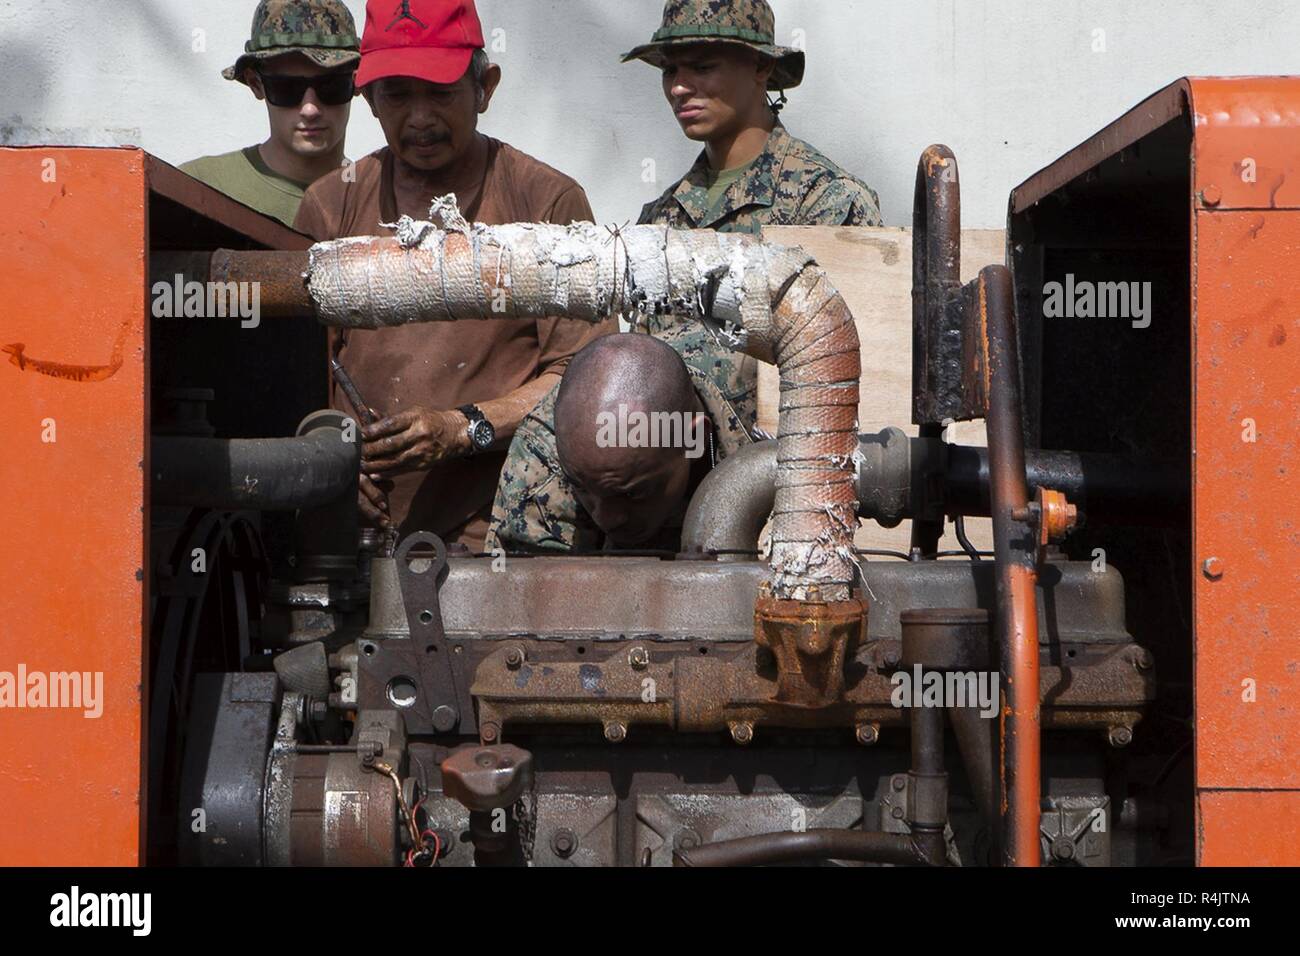 Marines with Combat Logistics Battalion 31 help repair a generator with a local at the gas station on Tinian, Commonwealth of the Northern Mariana Islands, Nov. 1, 2018. Businesses, government buildings, homes and schools were heavily damaged by Super Typhoon Yutu, which made a direct hit with devastating effect on Tinian Oct. 25 packing 170 MPH winds – it is the second strongest storm to ever hit U.S. soil and the strongest storm of 2018. Marines with the 31st Marine Expeditionary Unit and CLB-31 arrived on Tinian Oct. 29-31 in the wake of Super Typhoon Yutu as part of the U.S. Defense Suppor Stock Photo